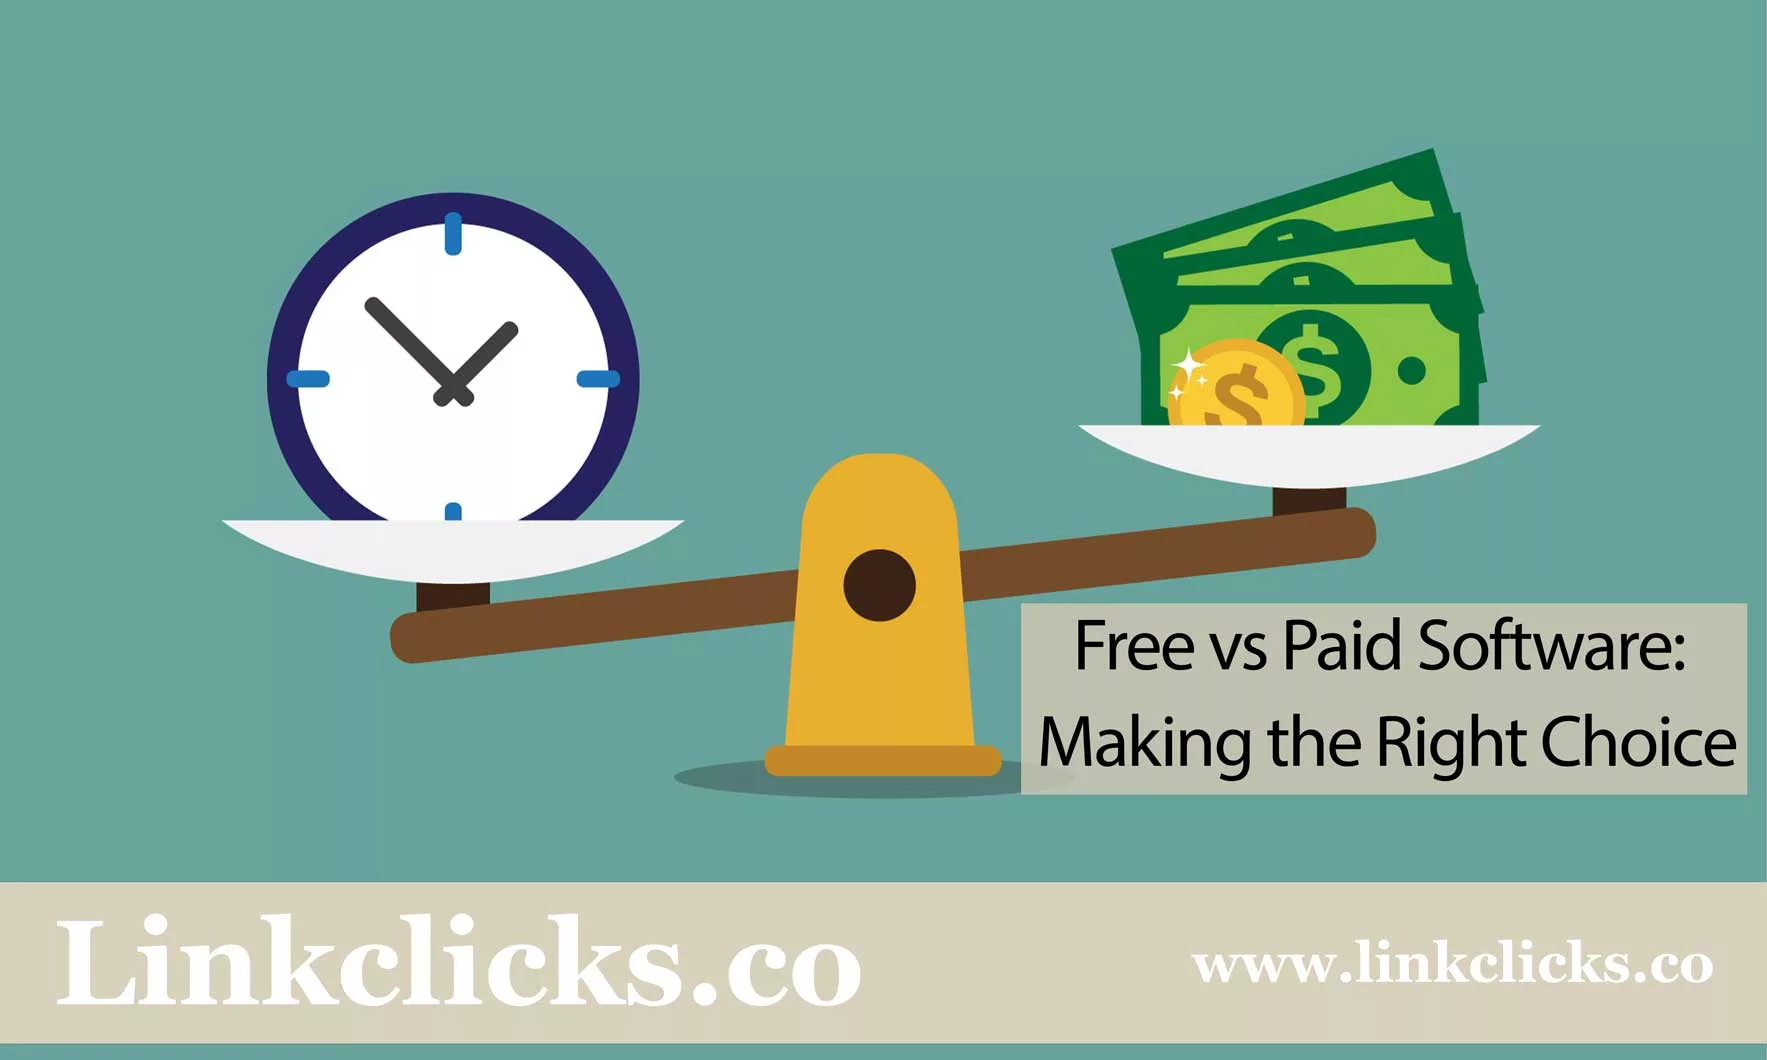 Free vs paid software